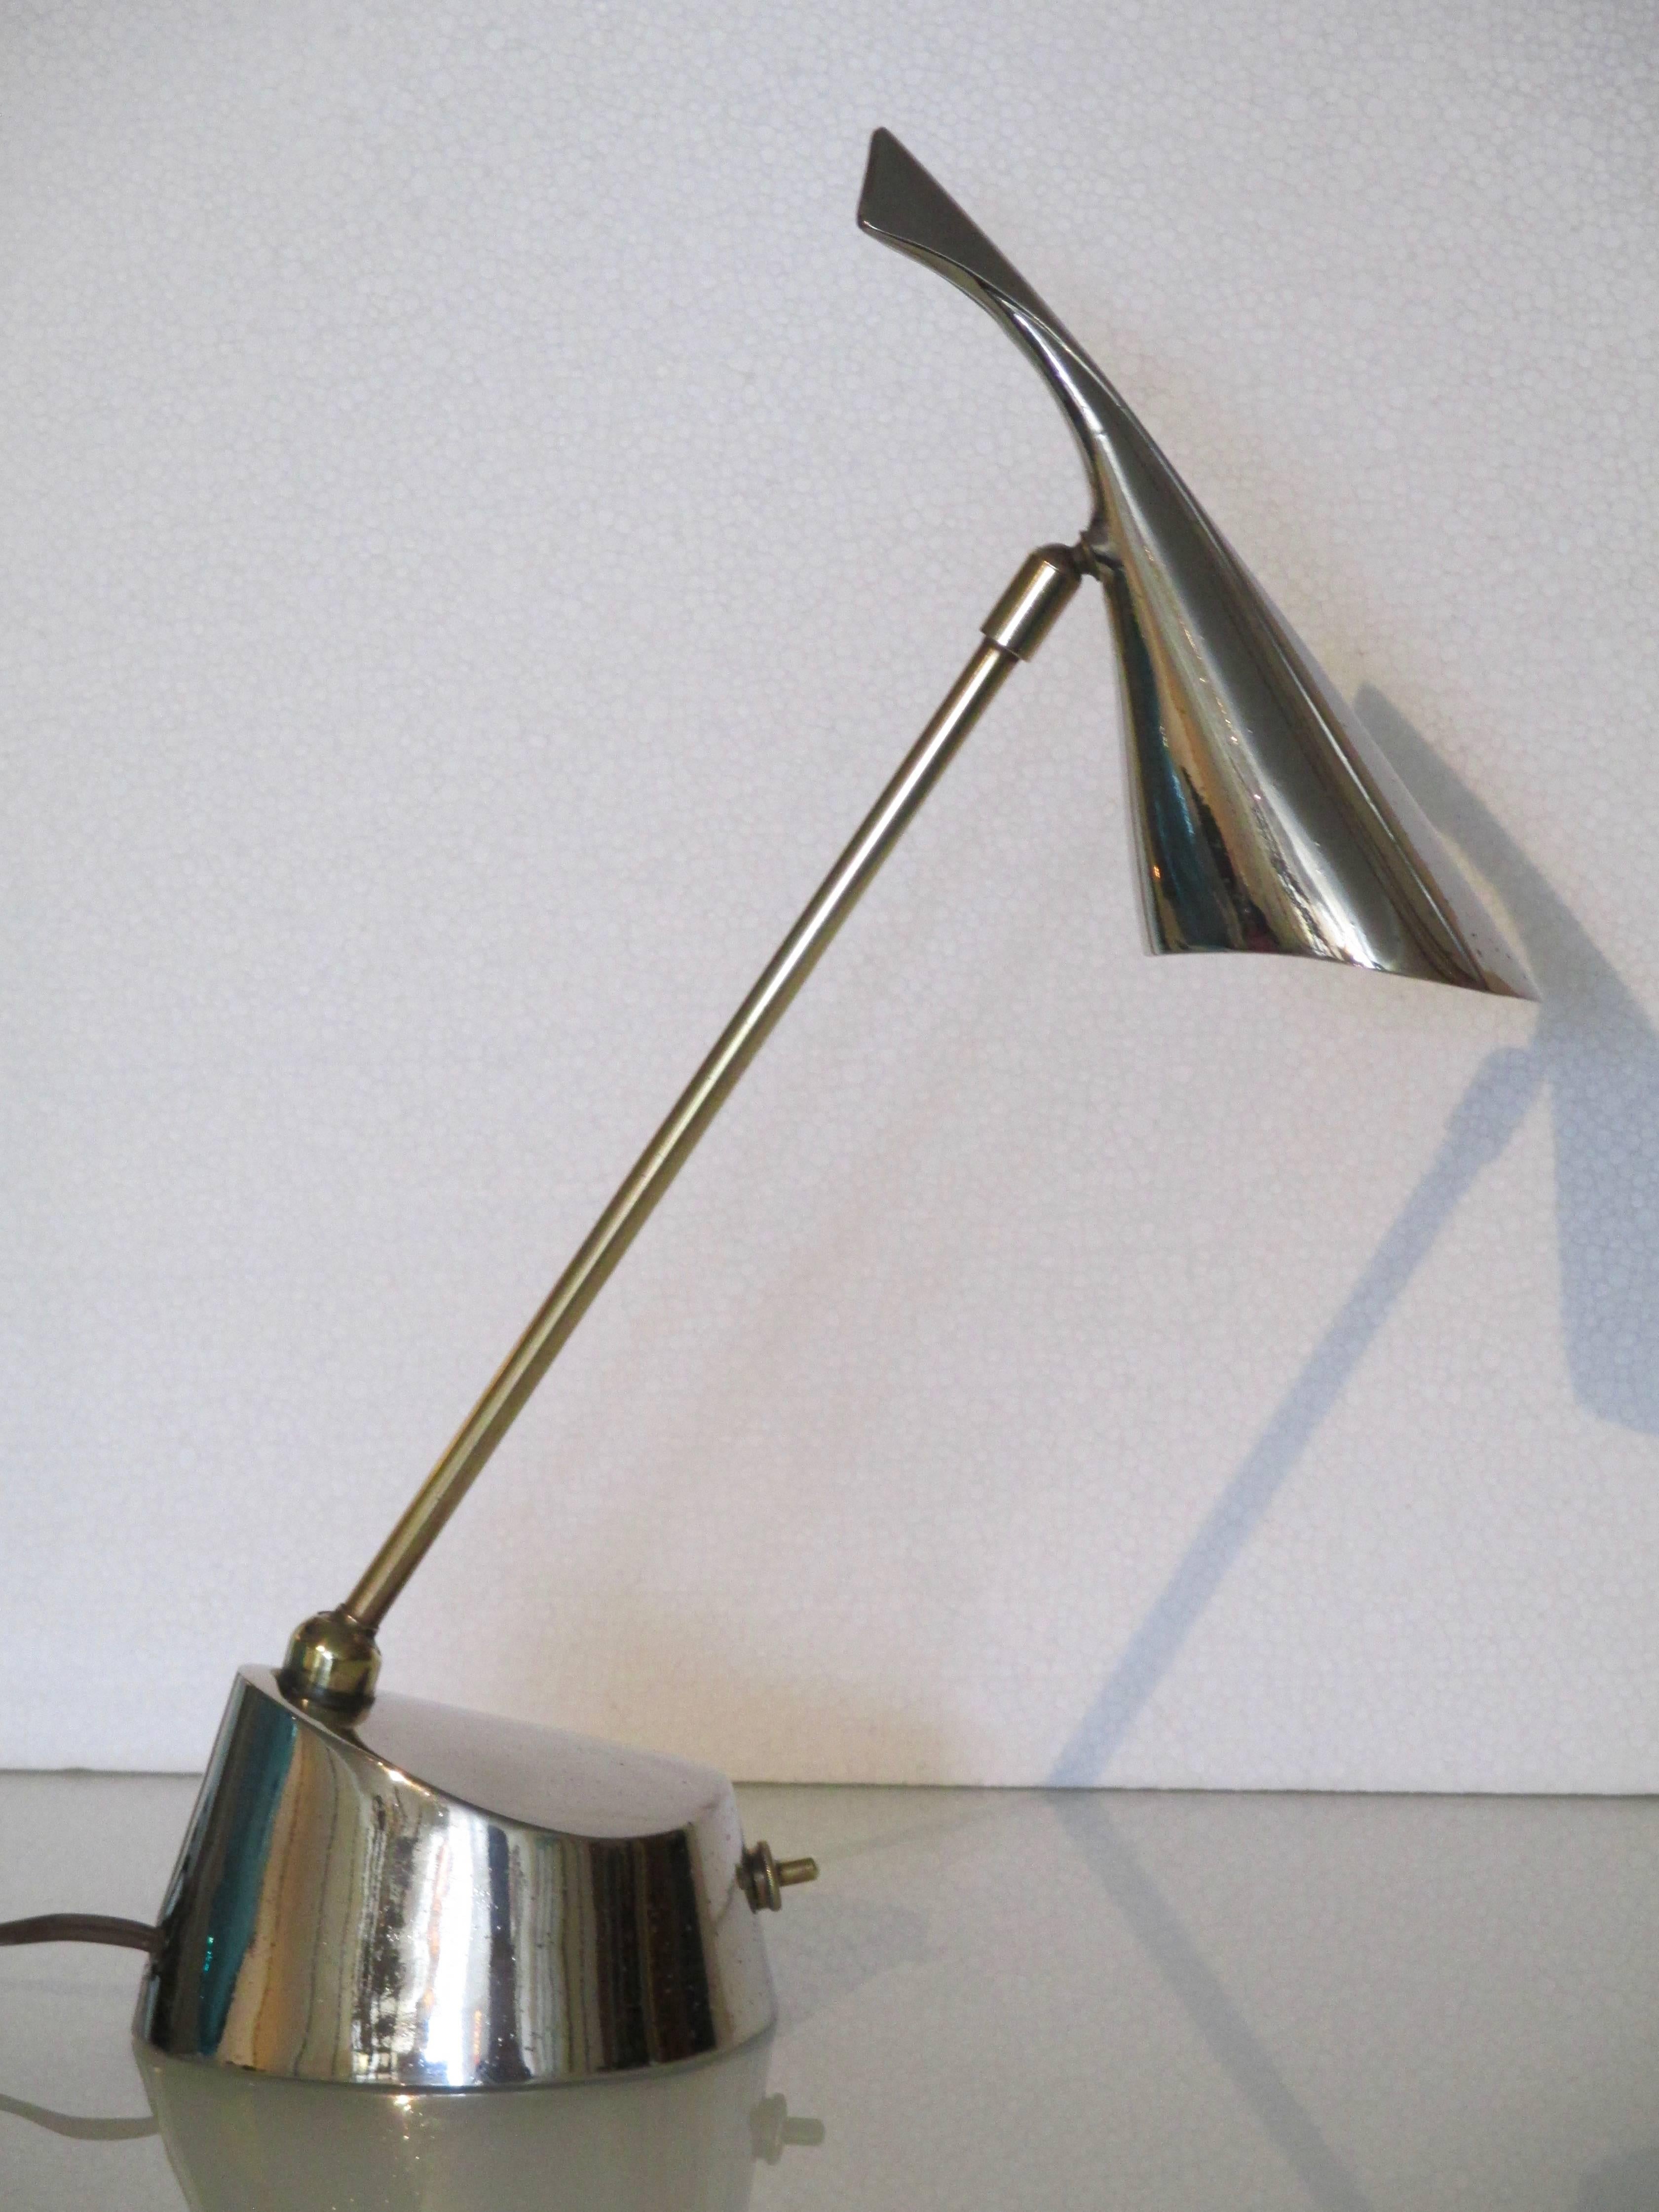 Striking table lamp with nickel finish and bass hardware,
by Laurel from the early 1960s.